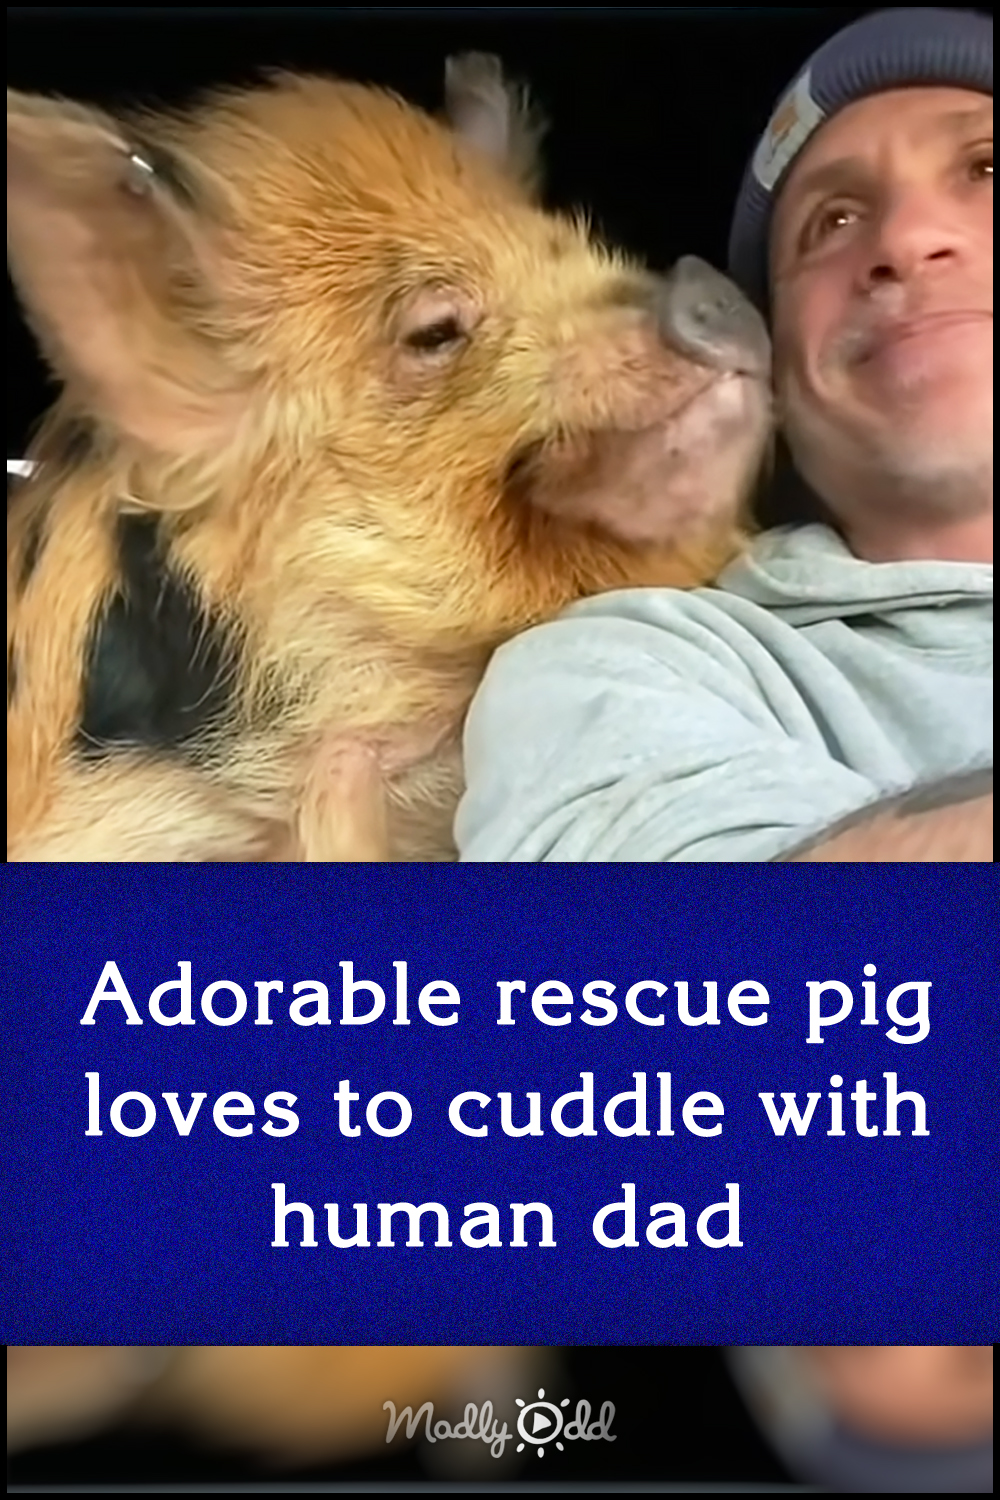 Adorable rescue pig loves to cuddle with human dad